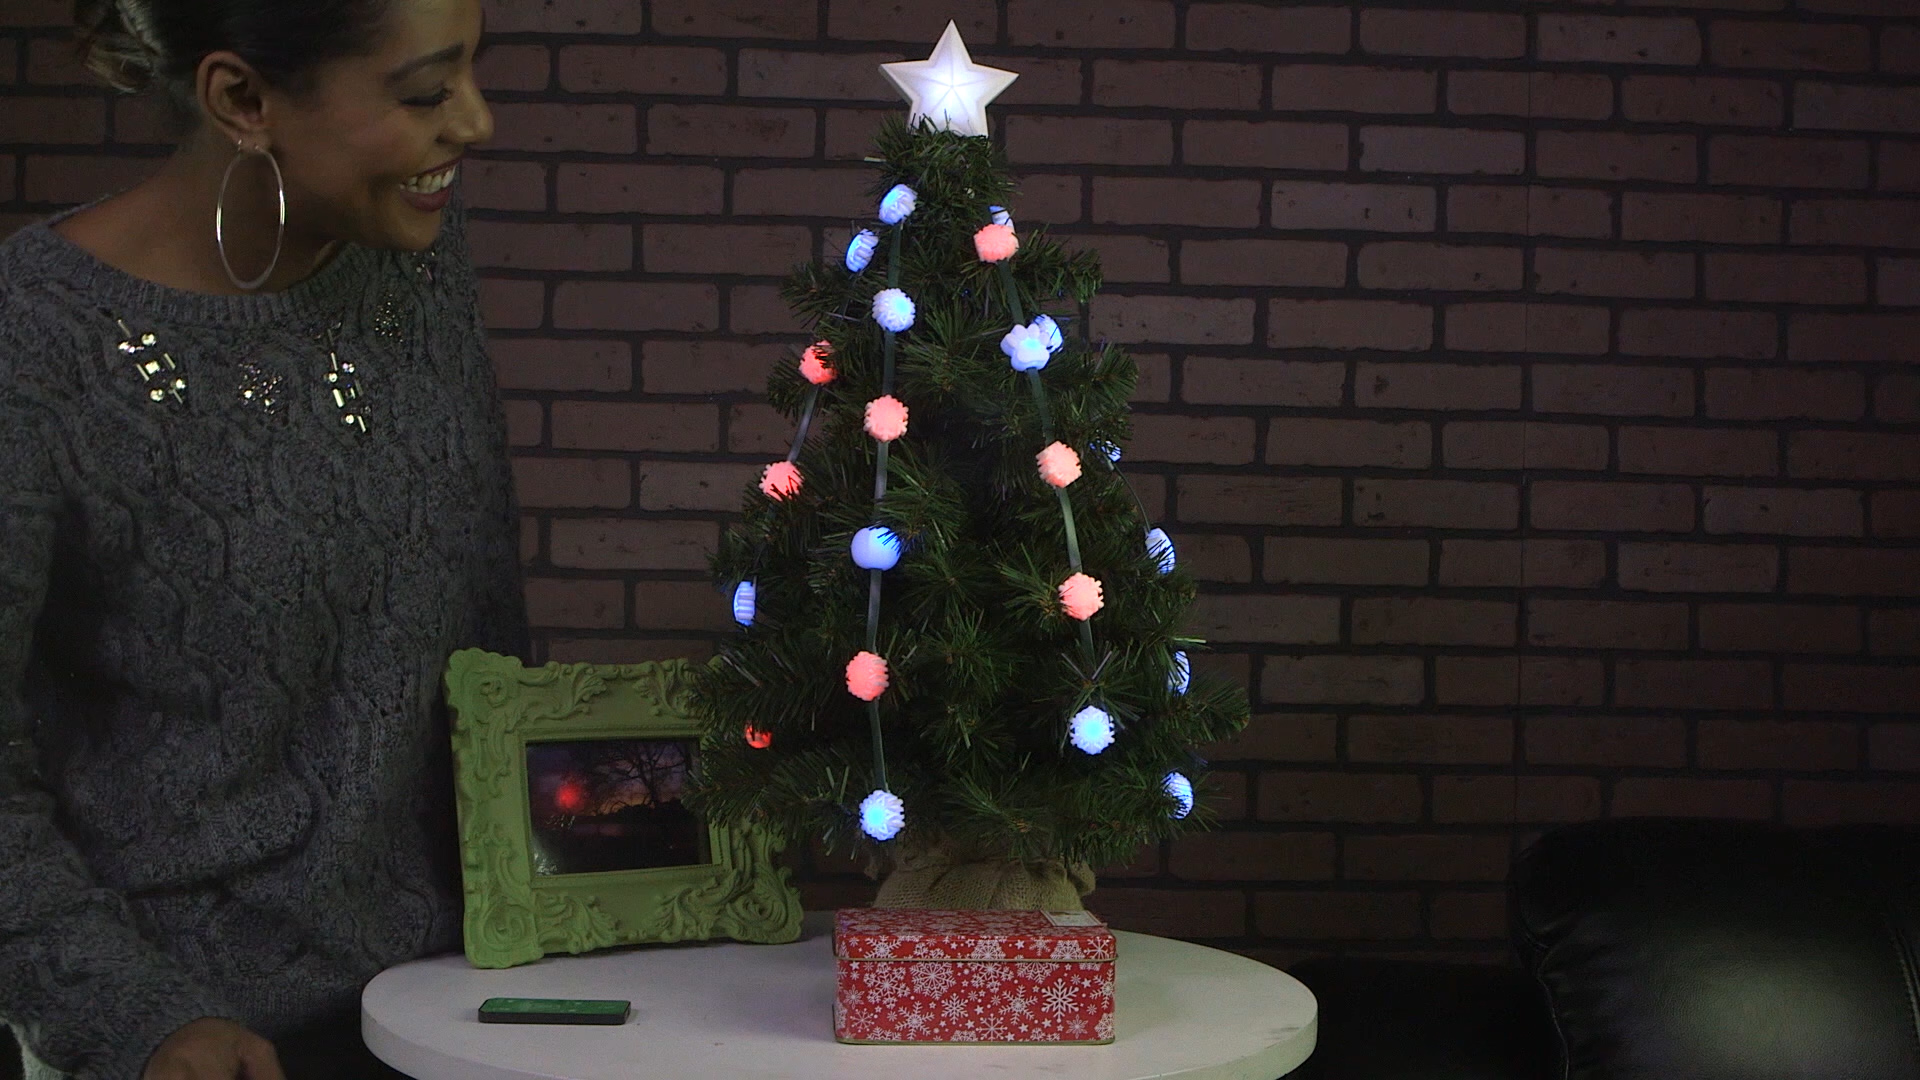 Geek My Tree A Better Kind of Holiday Festive NewsWatch Review